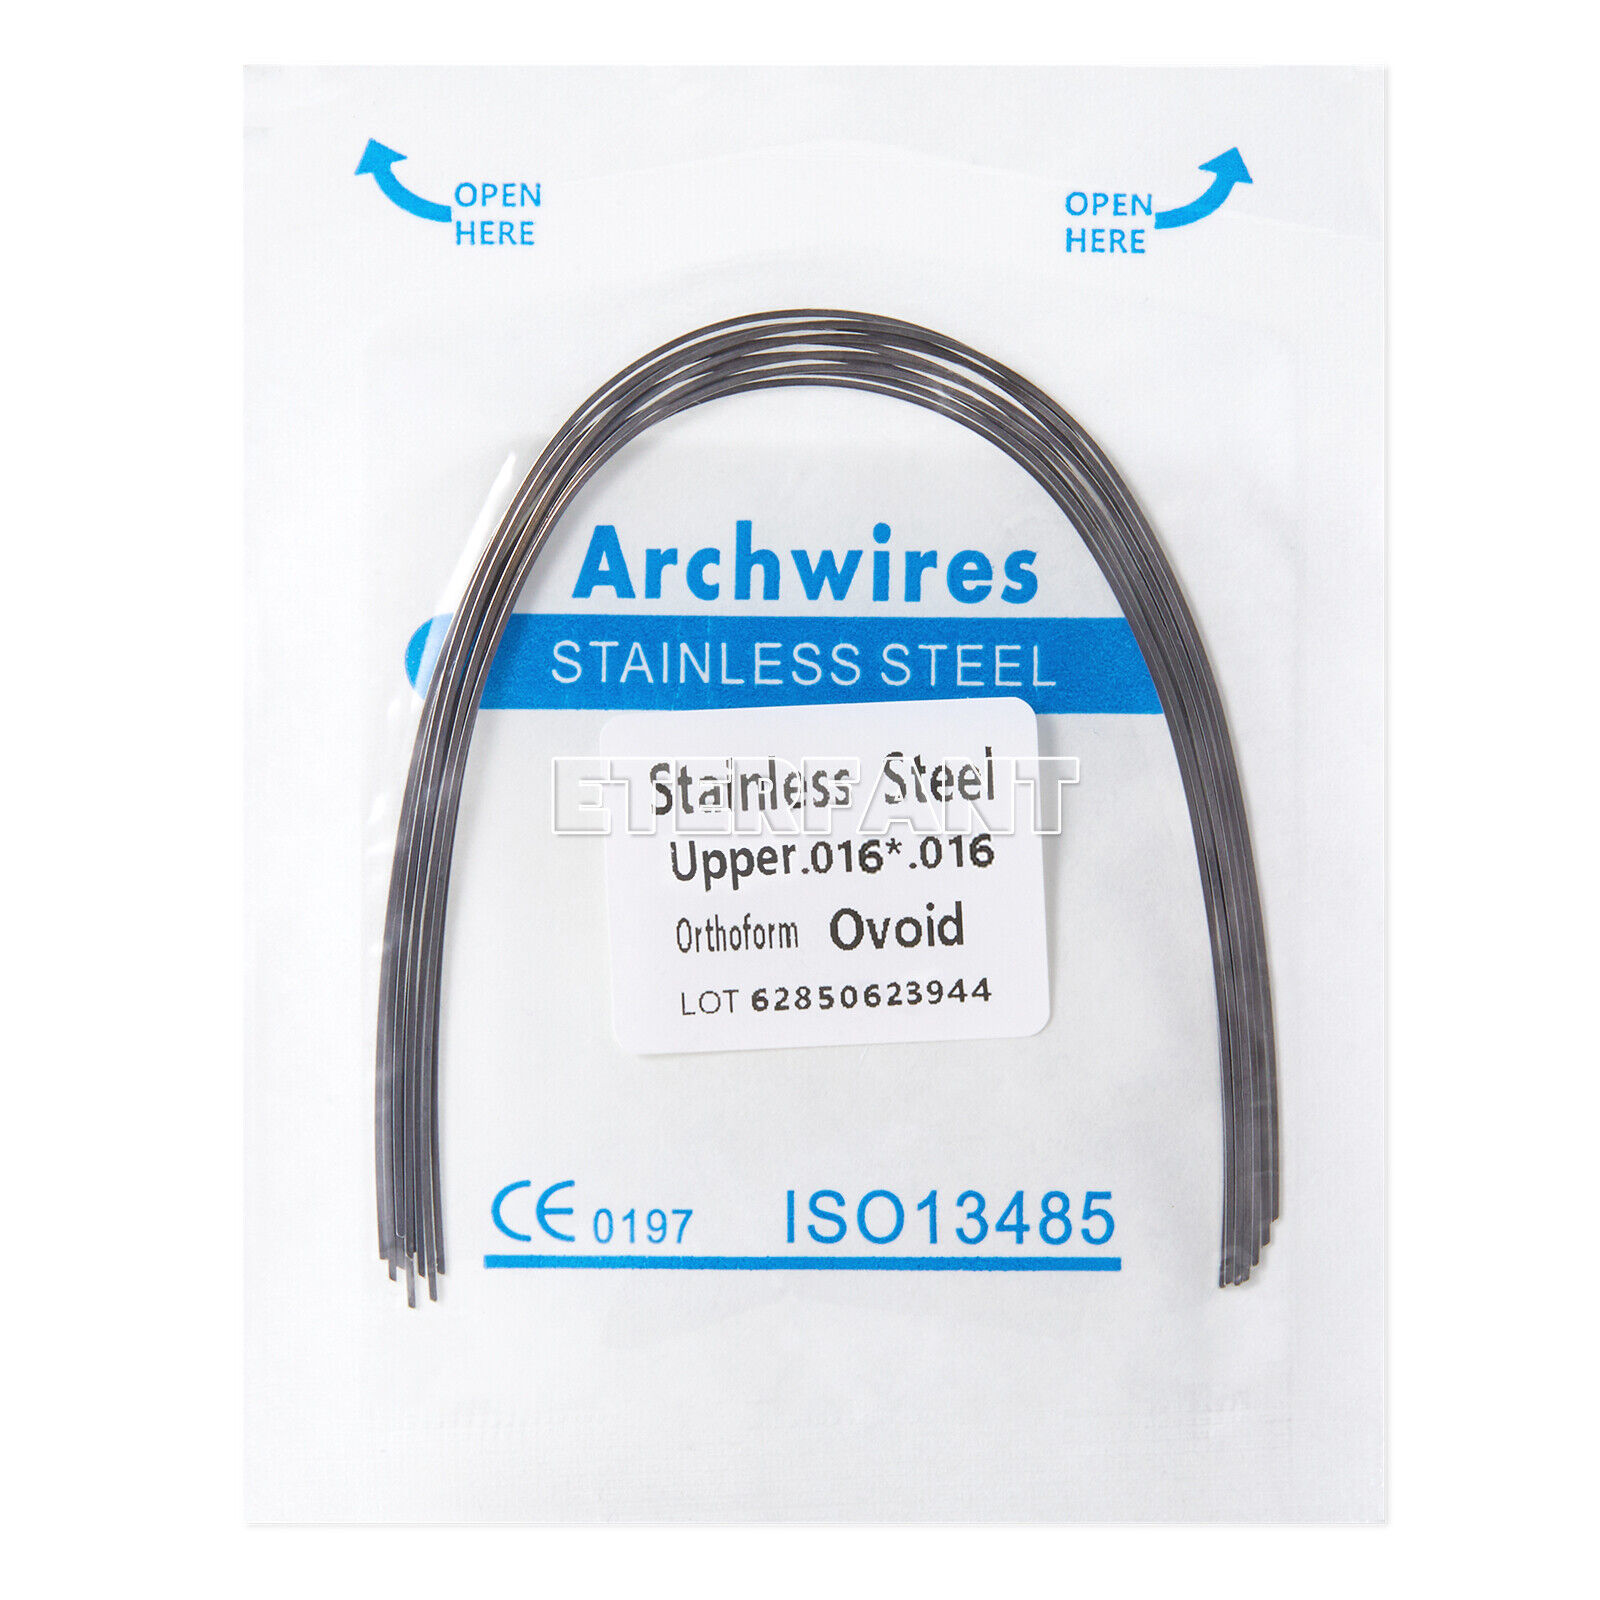 10PCs ETERFANT Dental Orthodontic Arch Wires Stainless Steel Rectangular Ovoid